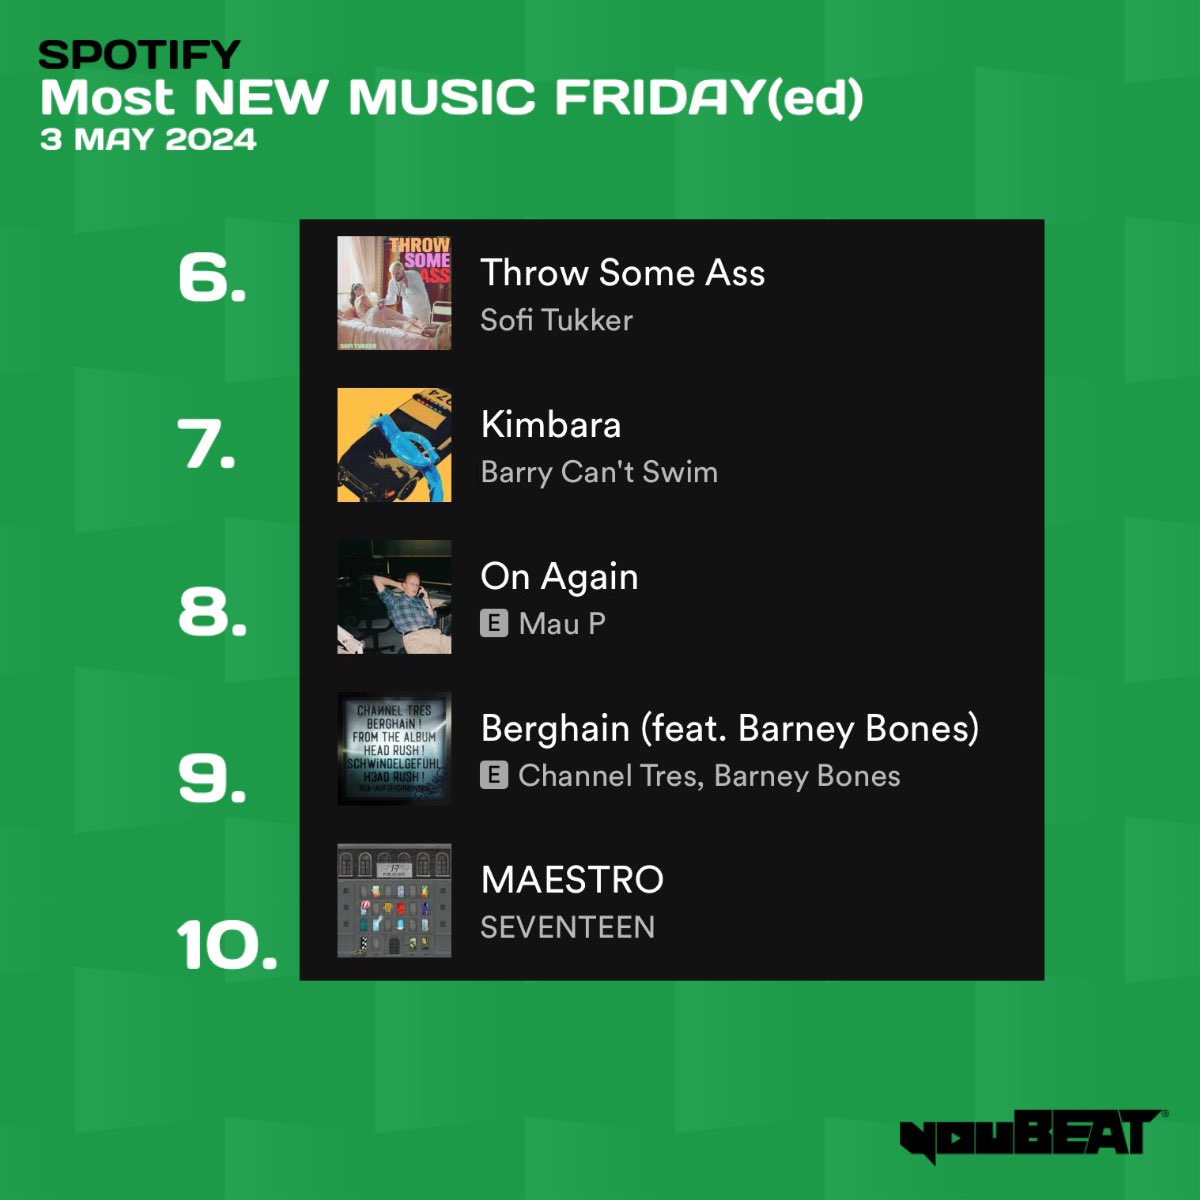 youBEAT MNMF(ed) - Dance/Electronic - May 3rd 2024 📊🎶 The 10 most #Spotify “New Music Fridayed” dance/electronic tracks of the week globally! 🌍(In chart order) [Powered by #superfridaychart] ▶️ sptfy.com/MNMFed